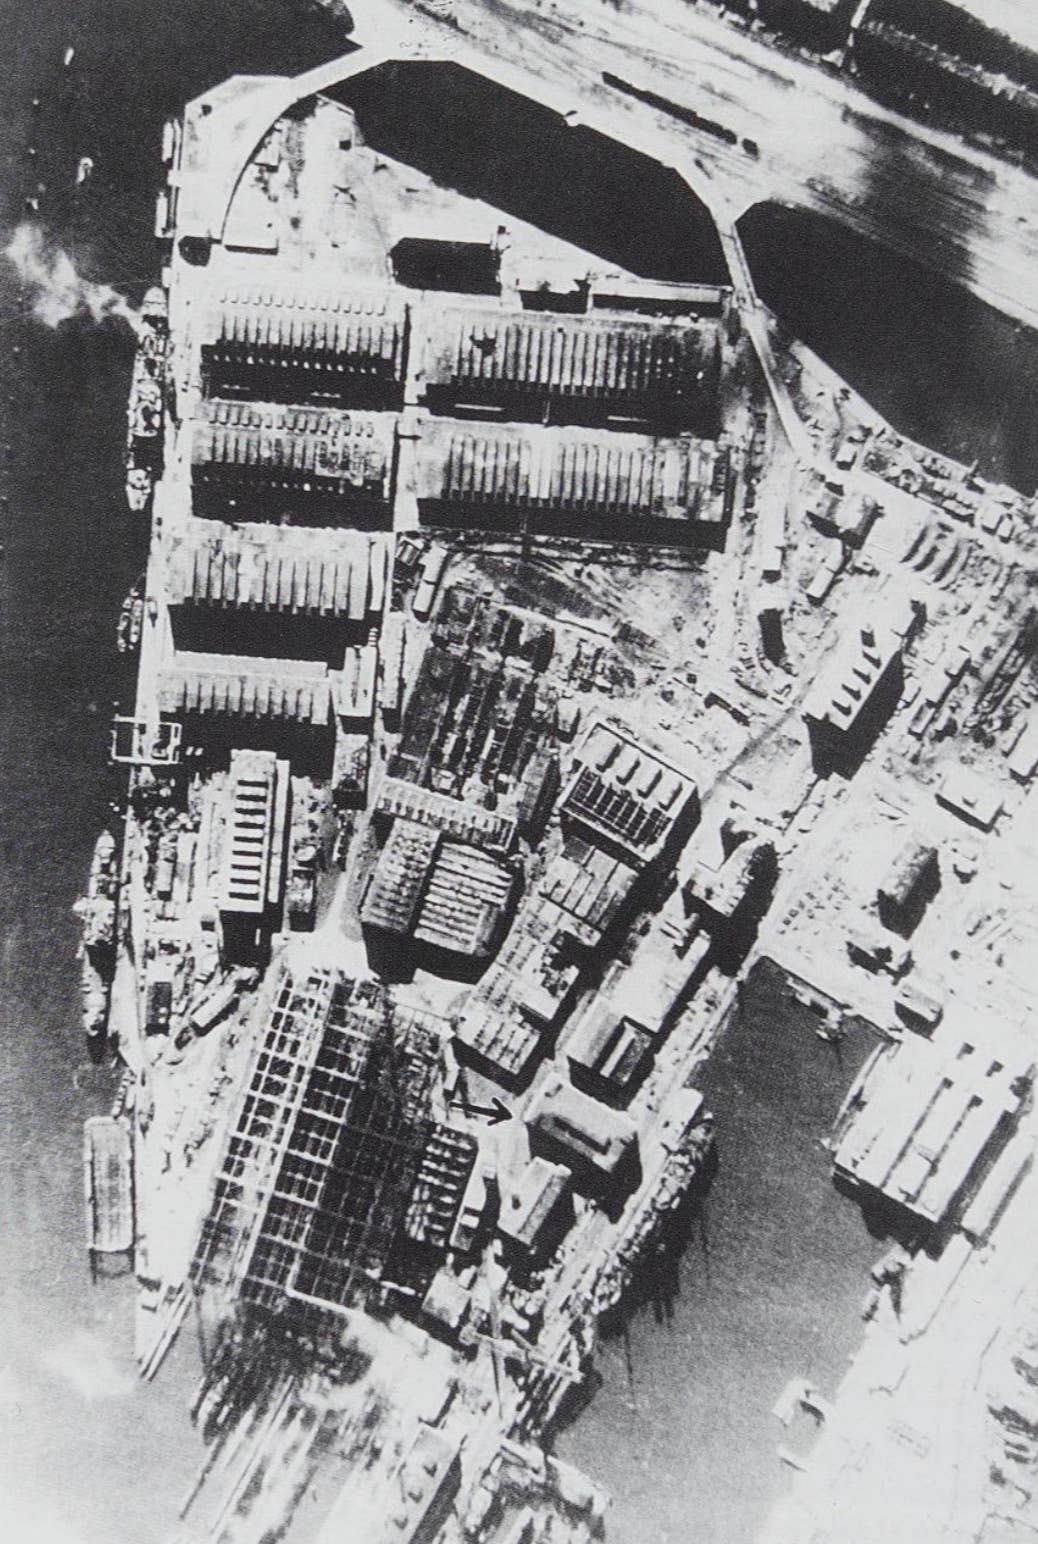 Elbe II seen from the air, likely early on in the war, in the right hand corner. <em>Jak P. Mallmann Showell </em>